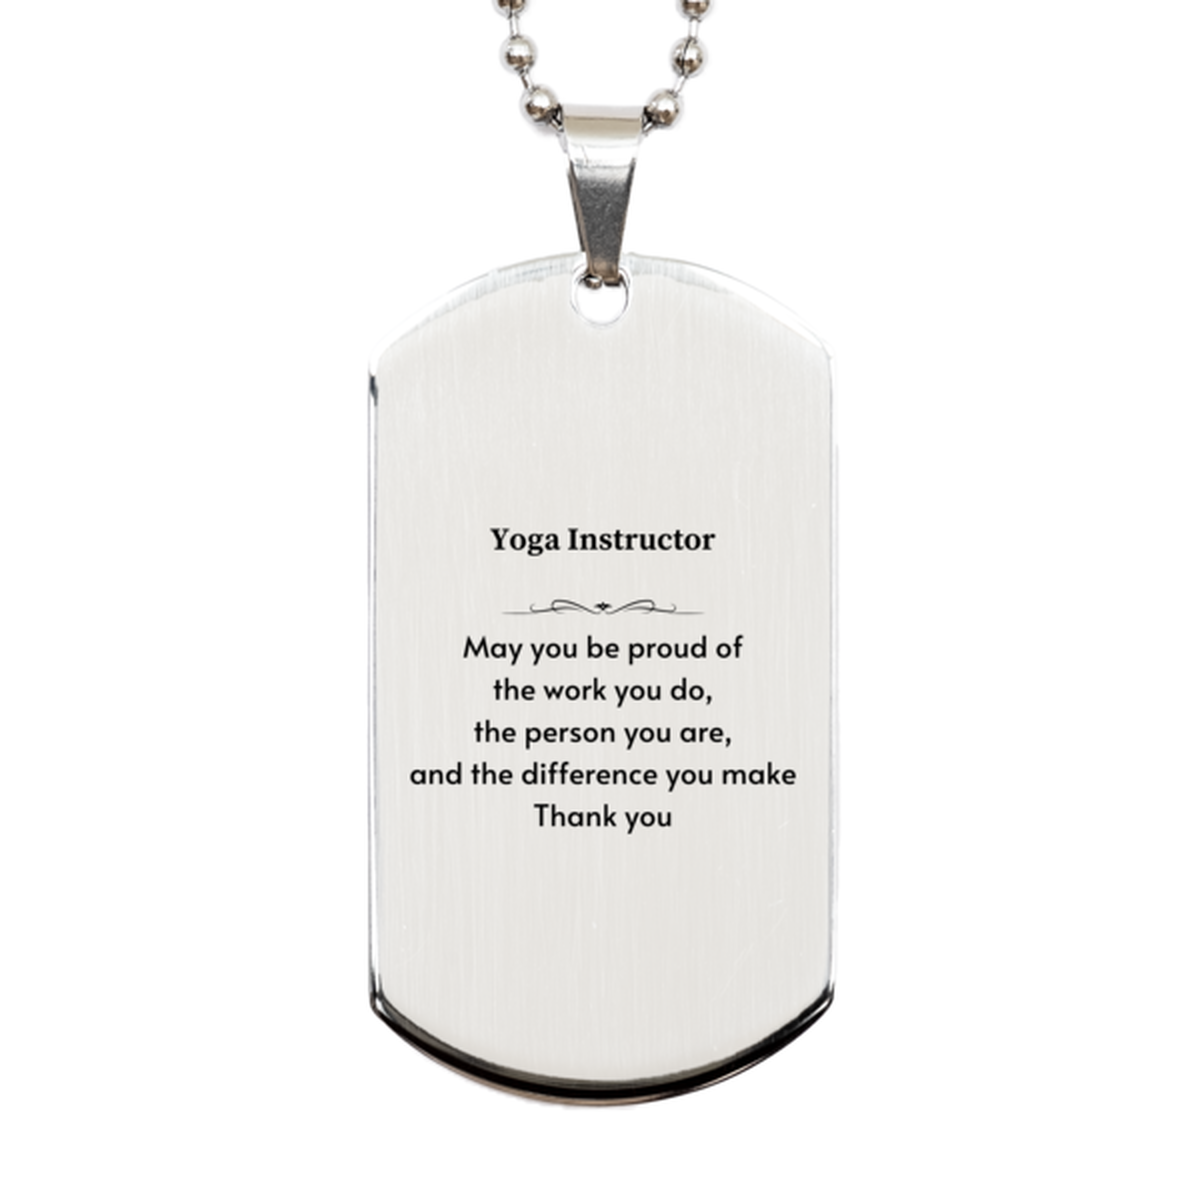 Heartwarming Silver Dog Tag Retirement Coworkers Gifts for Yoga Instructor, Yoga Instructor May You be proud of the work you do, the person you are Gifts for Boss Men Women Friends